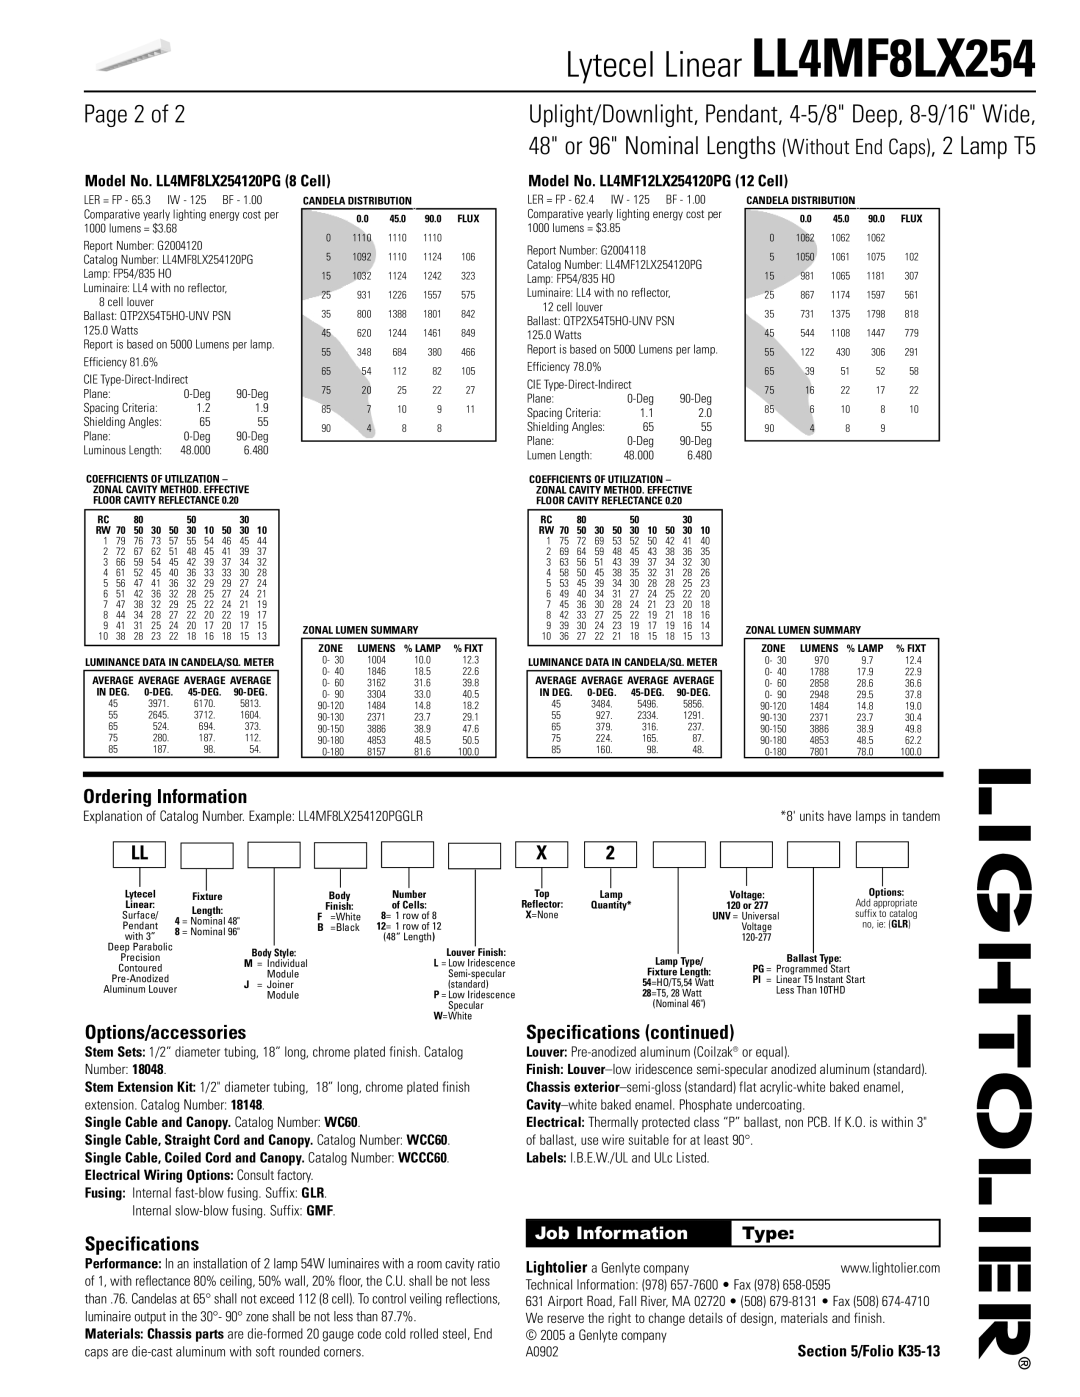 Lightolier LL4MF8LX254 Page 2 of, Ordering Information, Options/accessories, Specifications continued, Job Information 